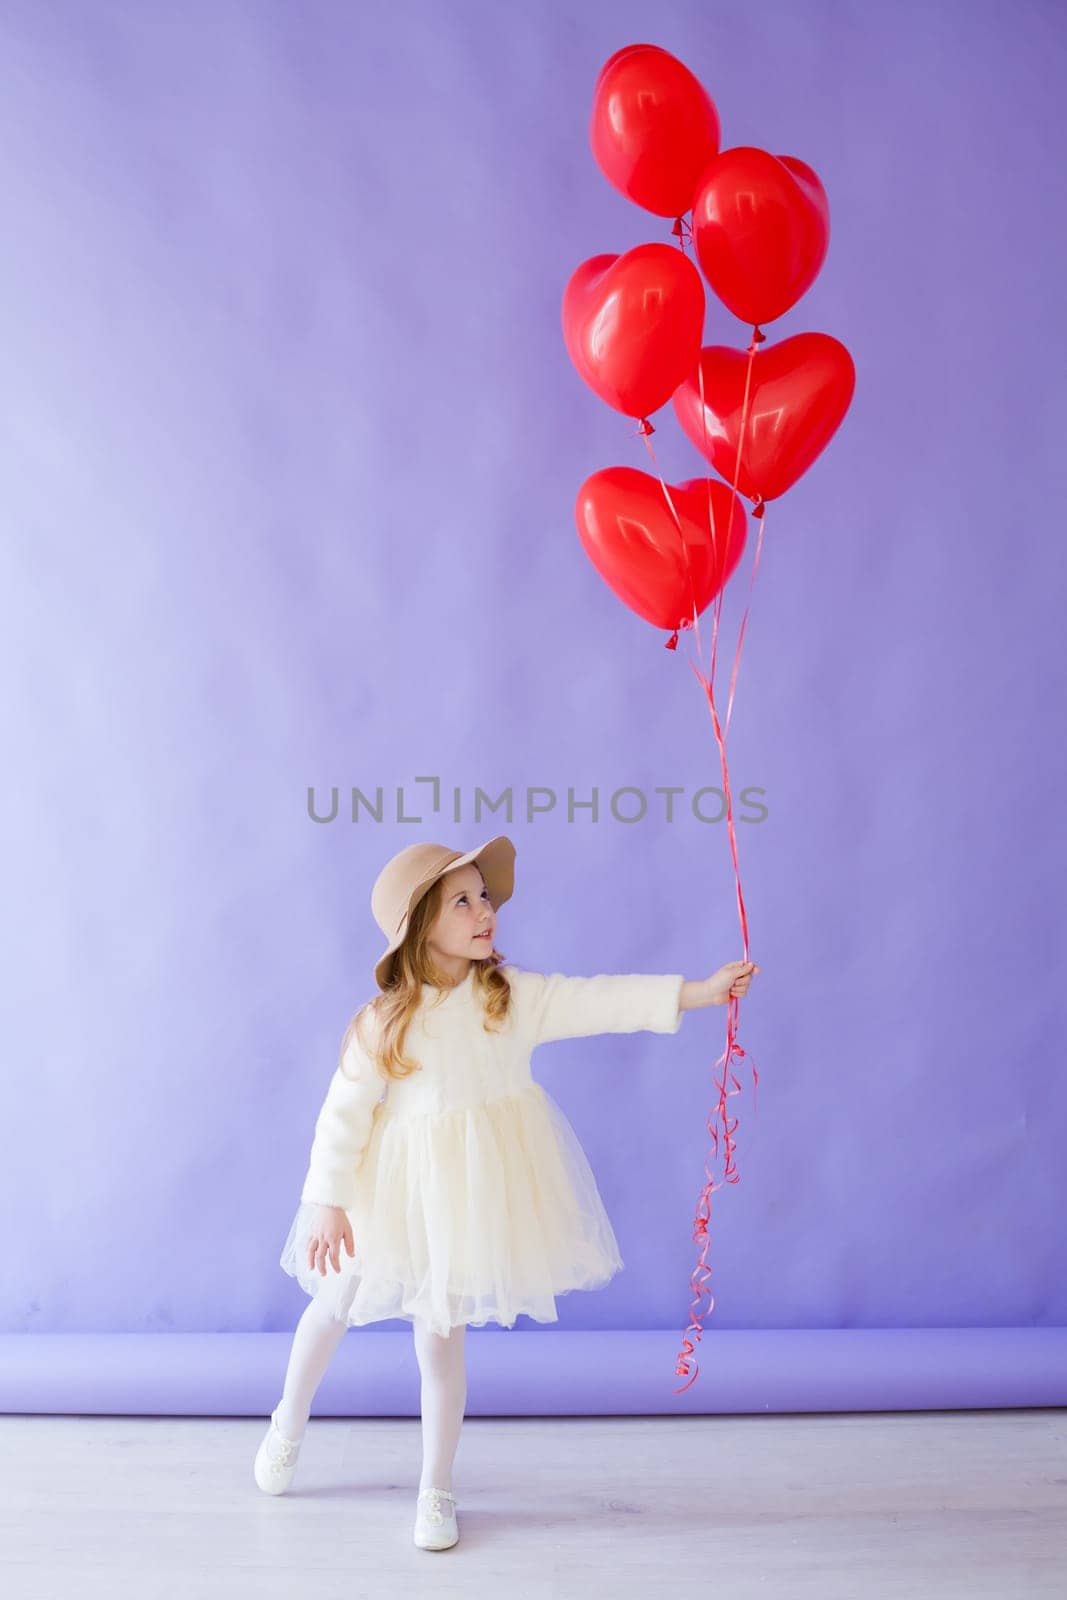 Girl with red heart-shaped balloons on birthday